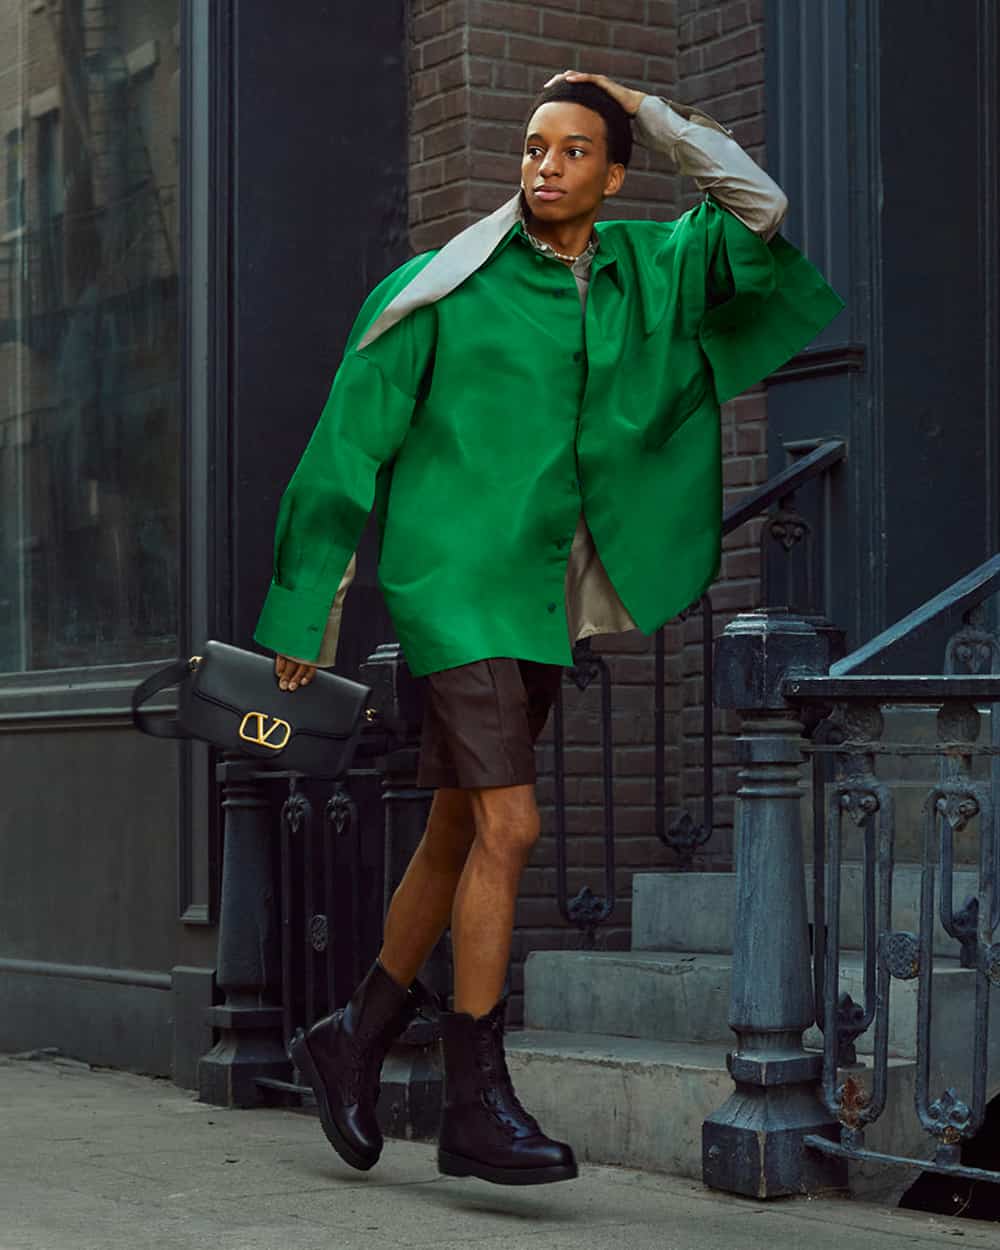 Man wearing Valentino green jacket, brown leather shorts and black leather boots